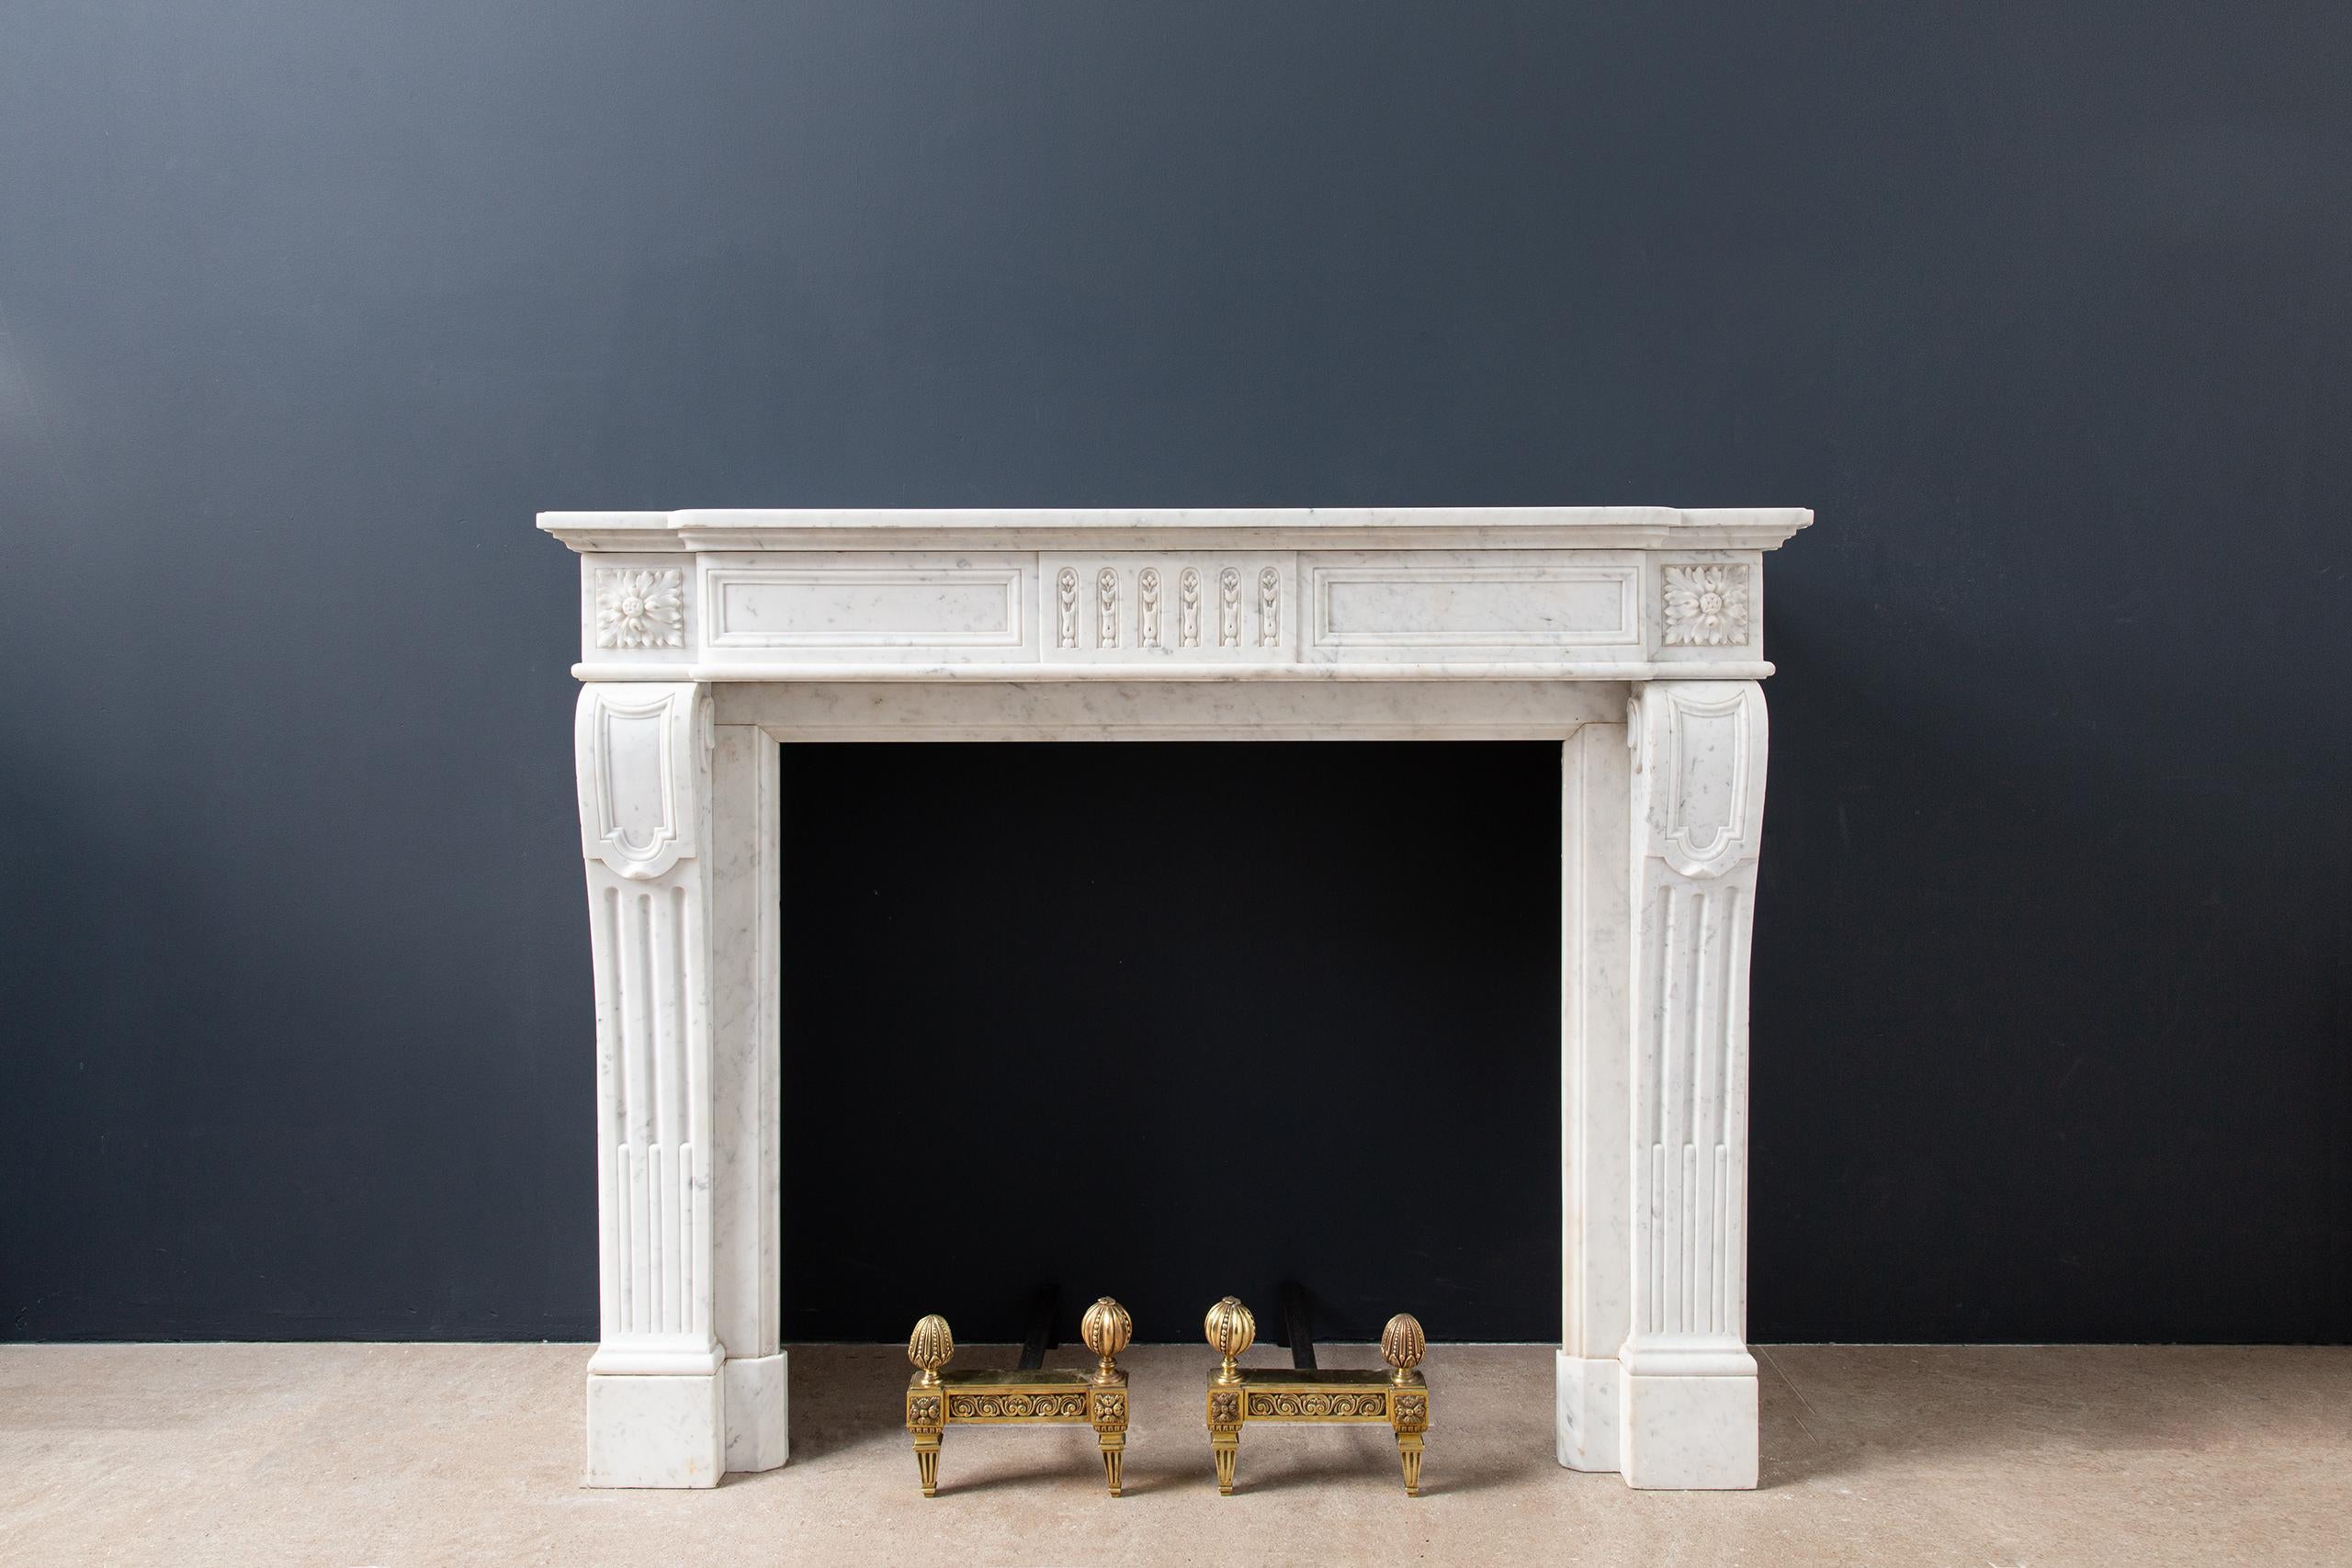 A beautiful French antique fireplace in Louis XIV style, made of Carrara marble. A beautiful and elegant antique fireplace that has a luxurious appearance due to its slim lines and beautiful profile. The difference in depth in the front makes this